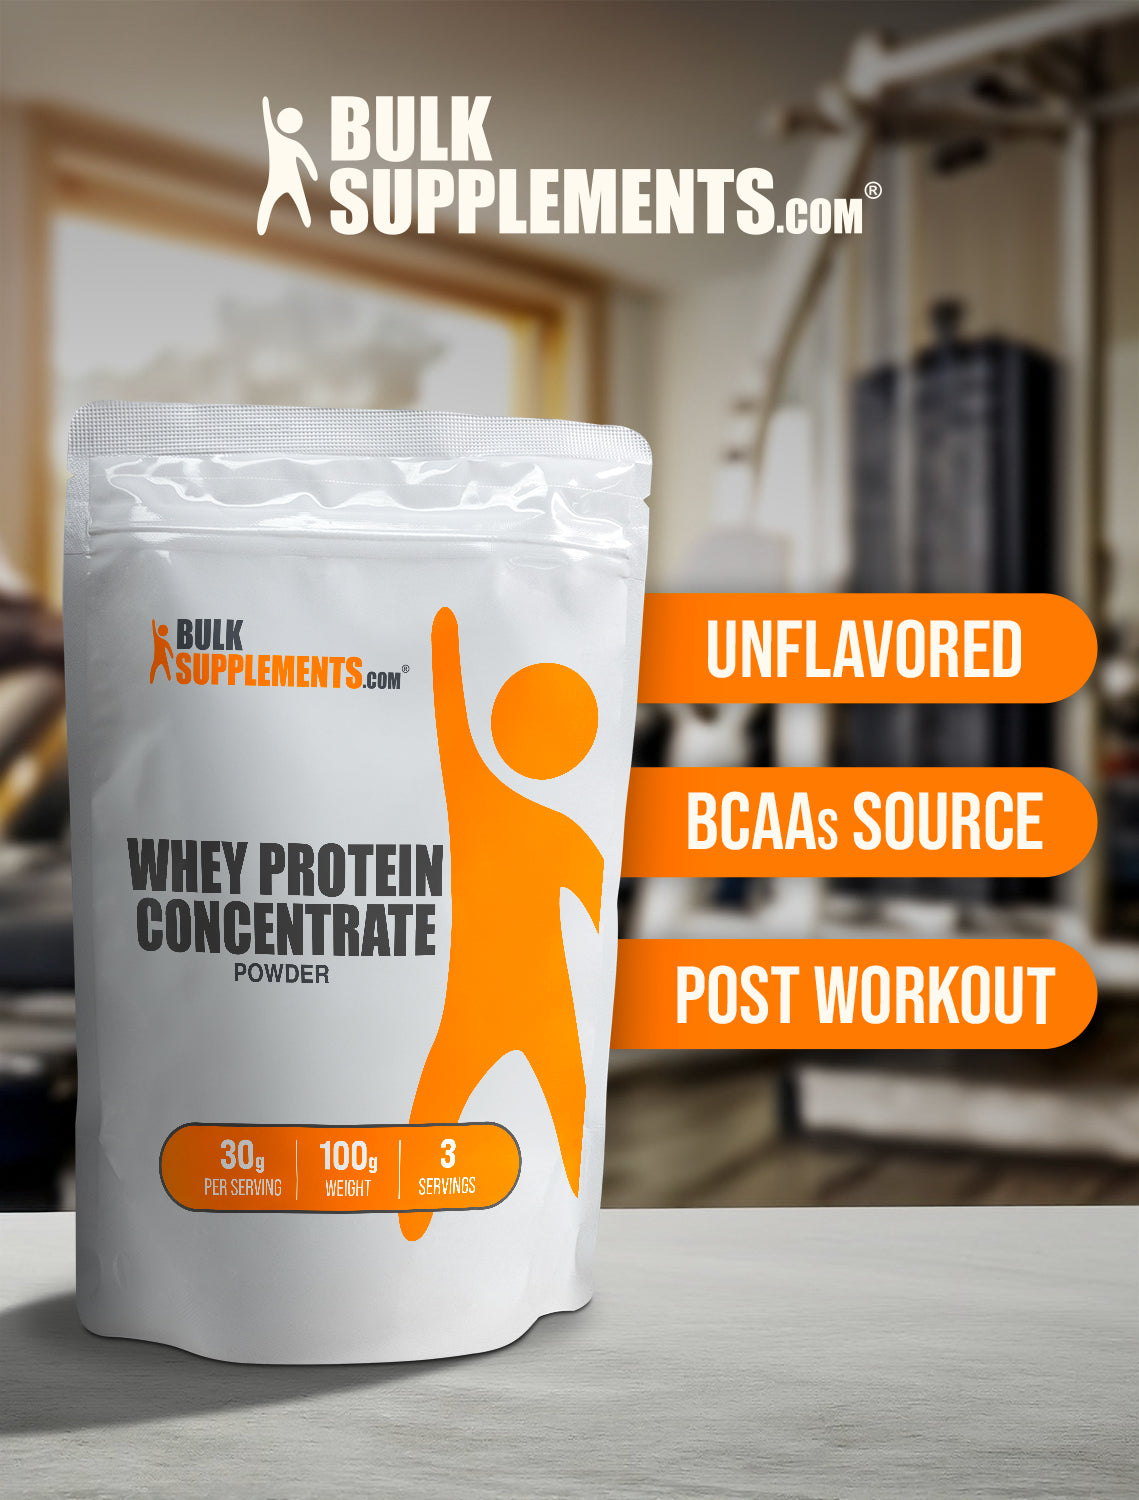 Whey protein concentrate powder 100g keywords image